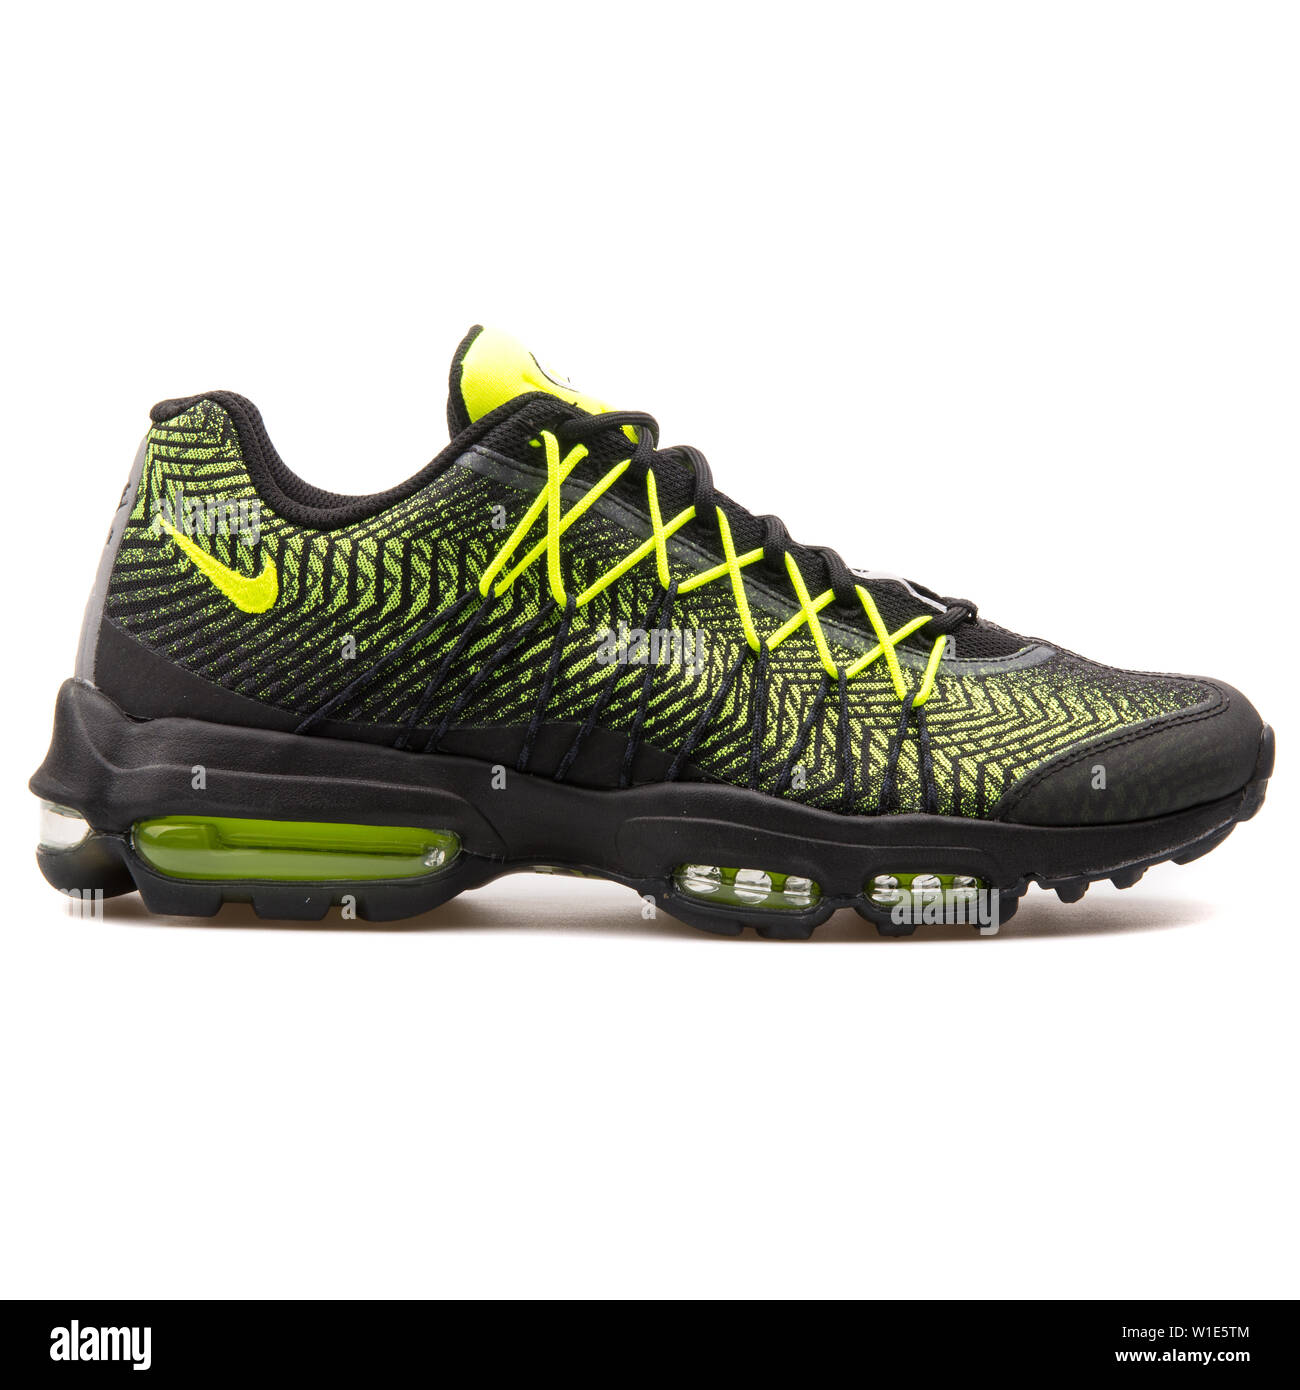 VIENNA, AUSTRIA - AUGUST 25, 2017: Nike Air Max 95 Ultra JCRD black and  volt green sneaker on white background Stock Photo - Alamy